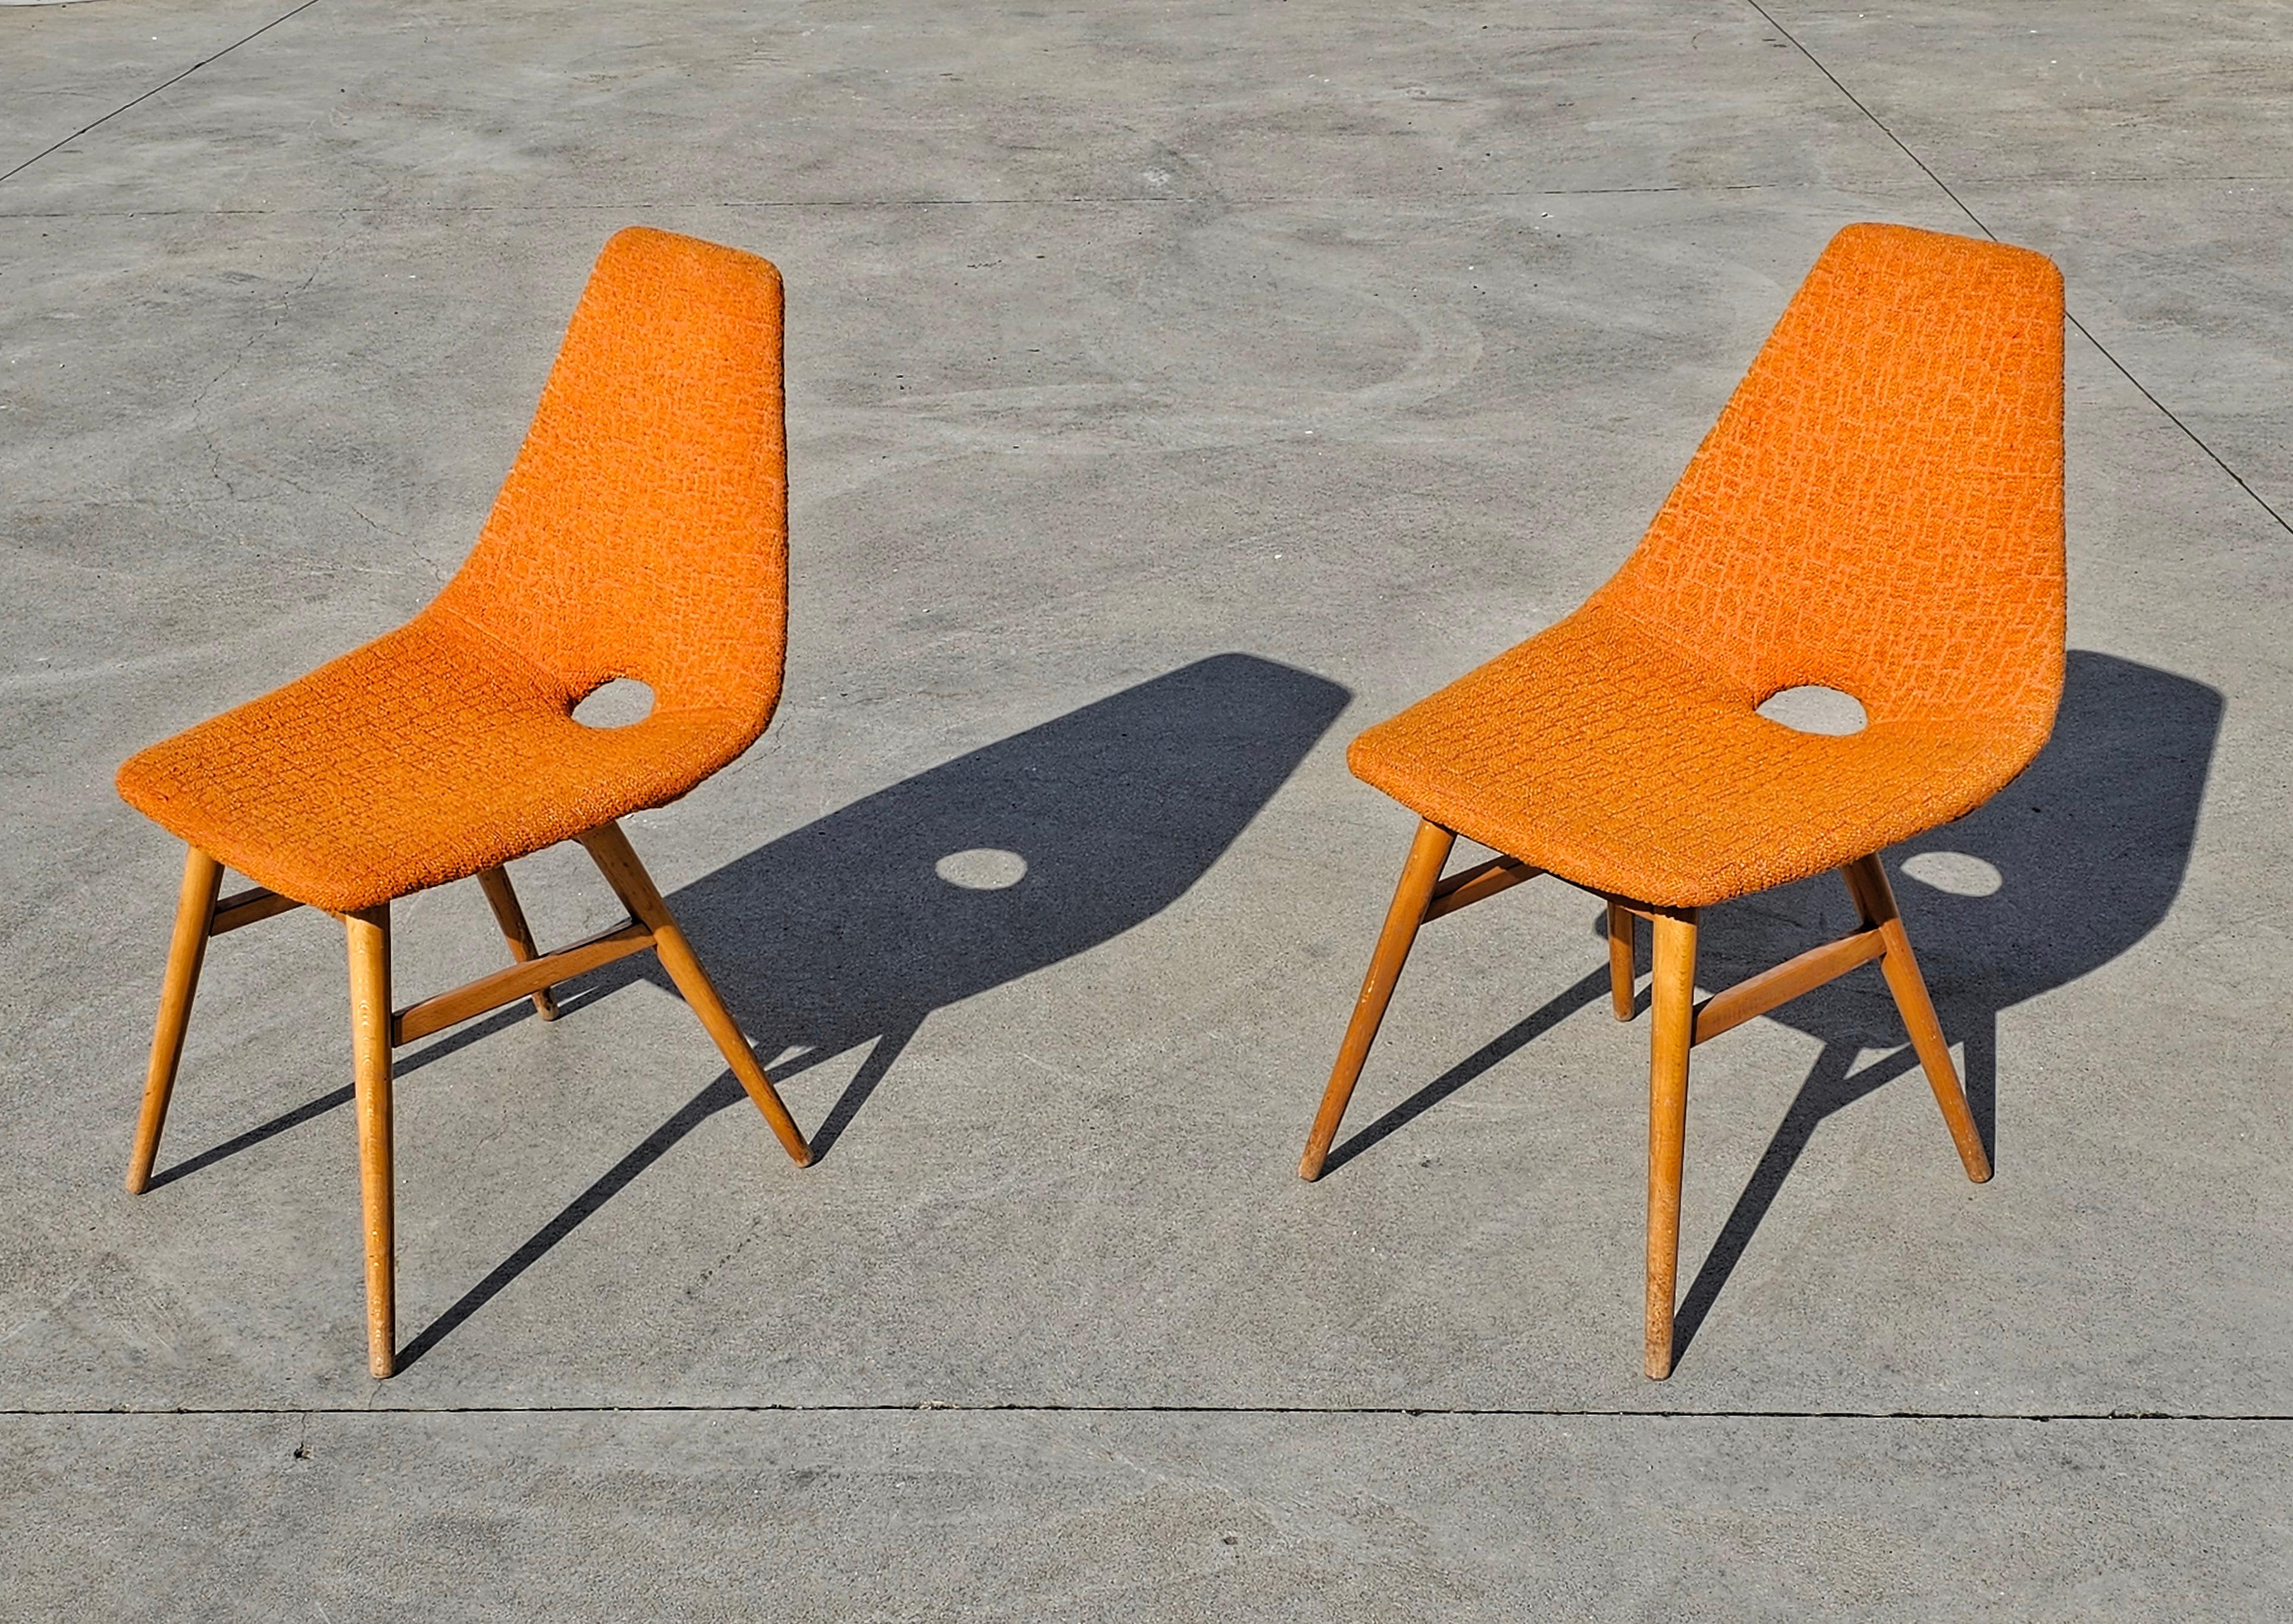 Fabric Pair of Mid-Century Modern Side Chairs by Judit Burian and Erika Szek, 1950s For Sale